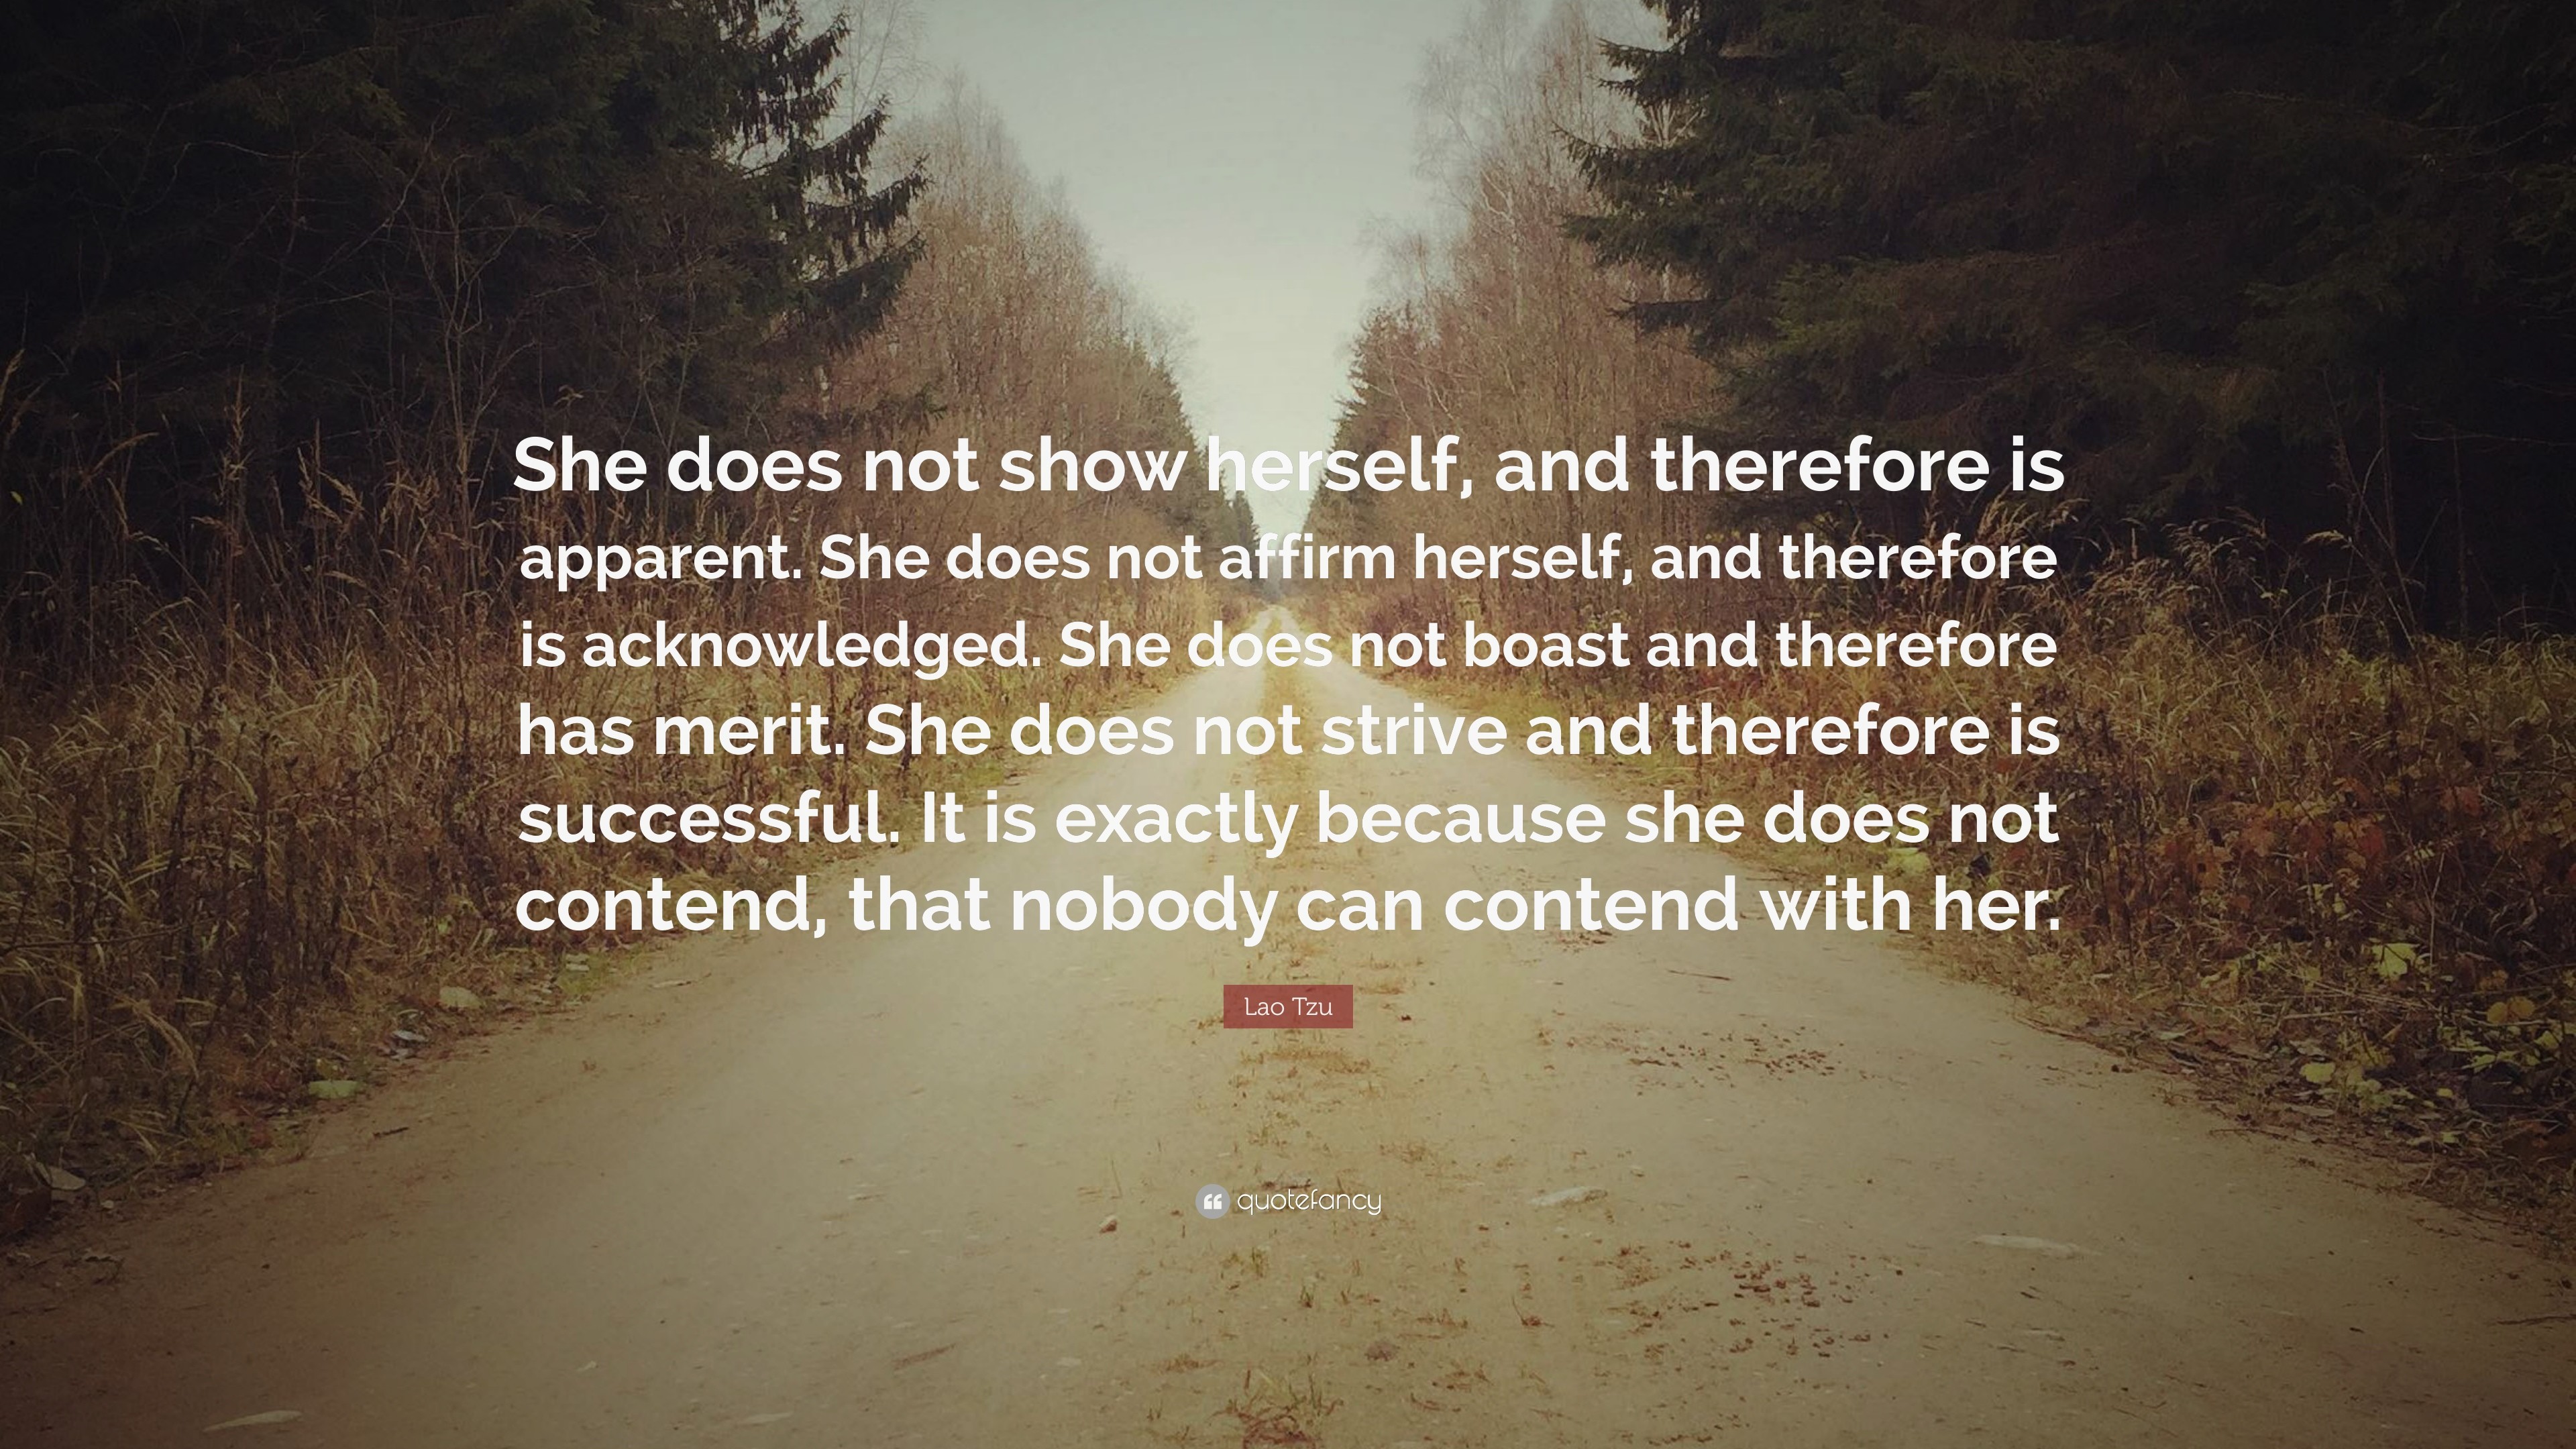 3840x2160 Lao Tzu Quote: “She does not show herself, and therefore is apparent.